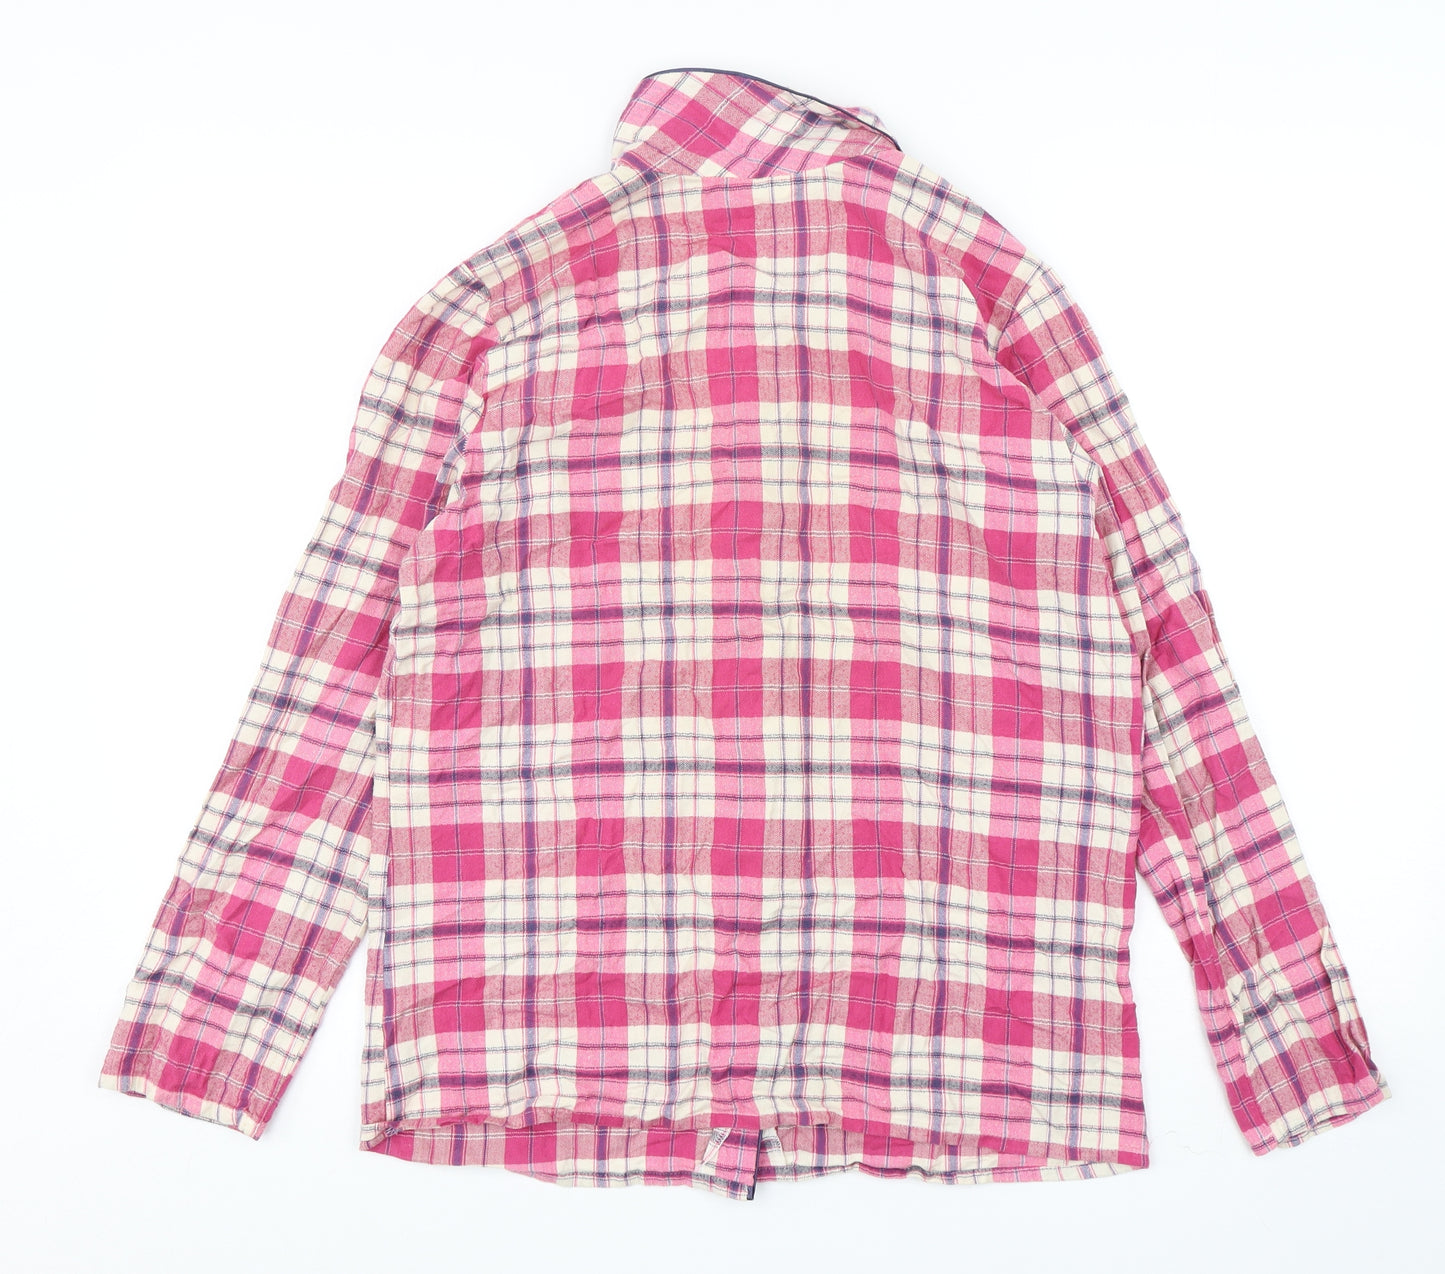 Marks and Spencer Womens Pink Plaid Cotton Top Pyjama Top Size 12  Button